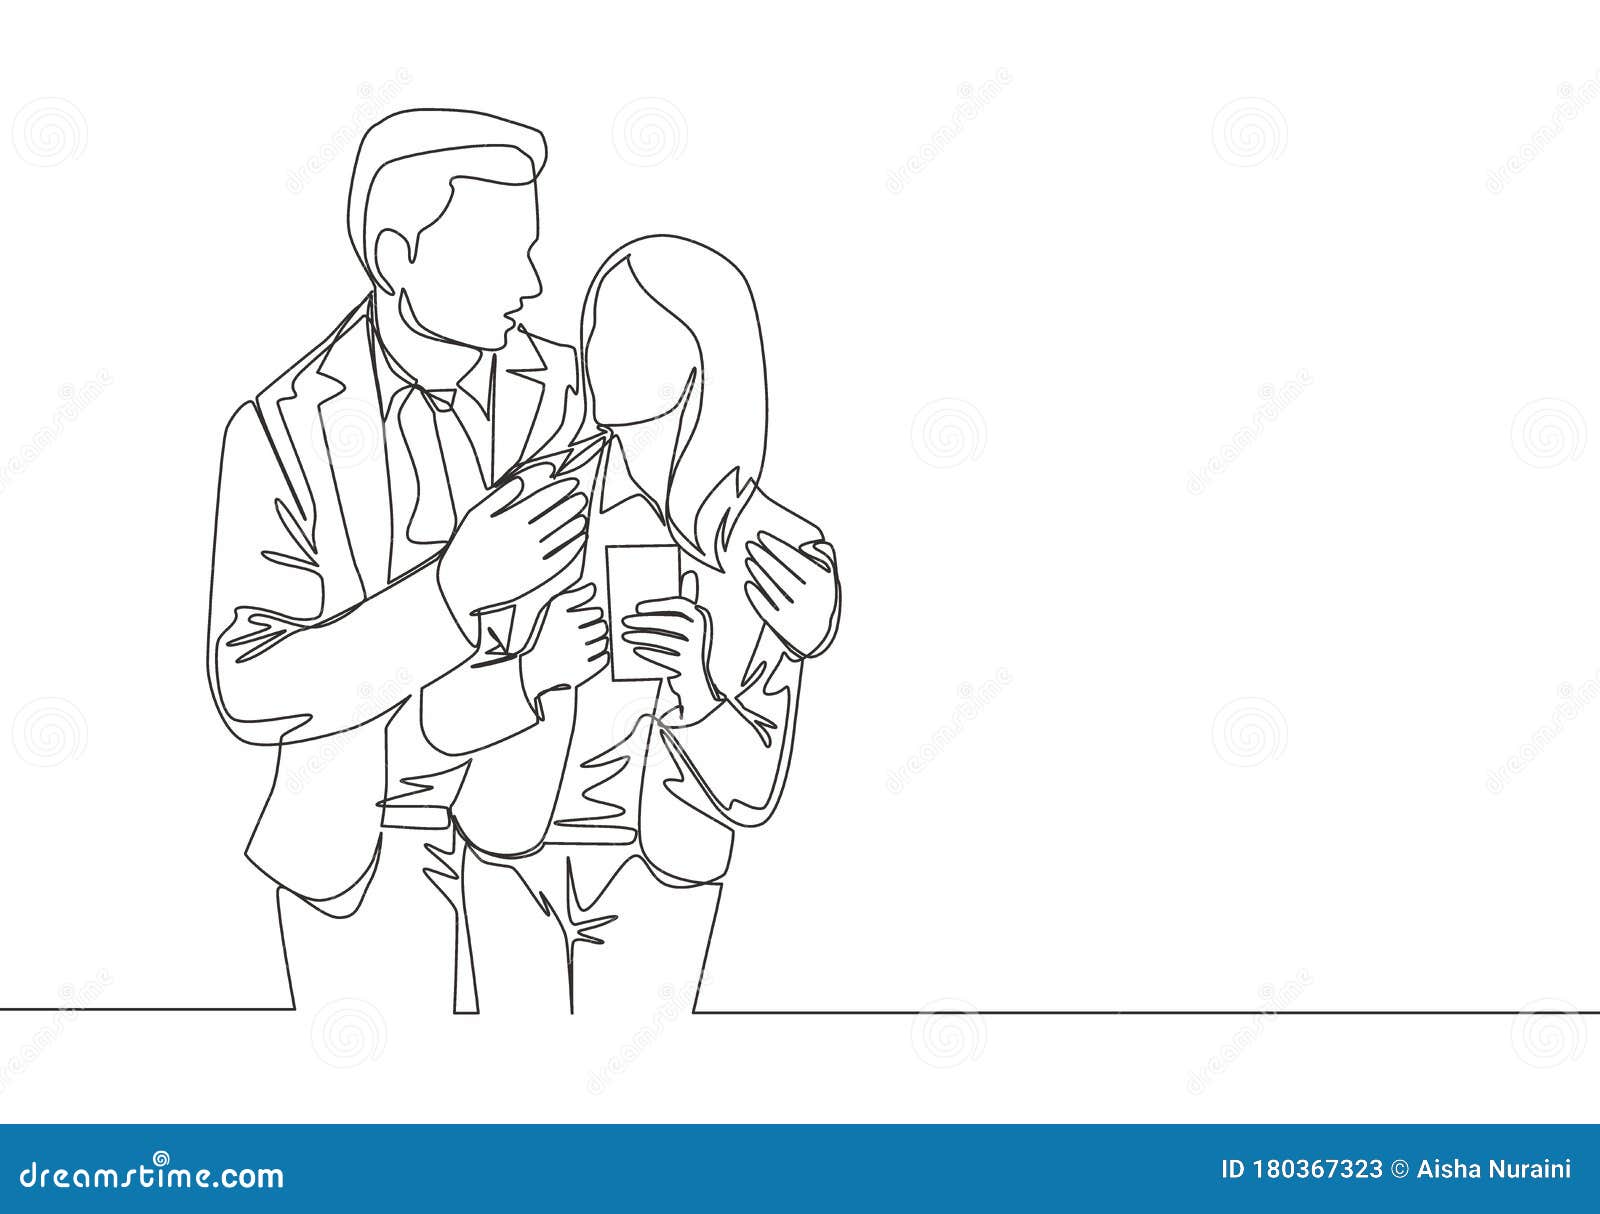 Happy Wedding Anniversary Wedding Drawing Anniversary Drawing Wedding  Sketch PNG and Vector with Transparent Background for Free Download